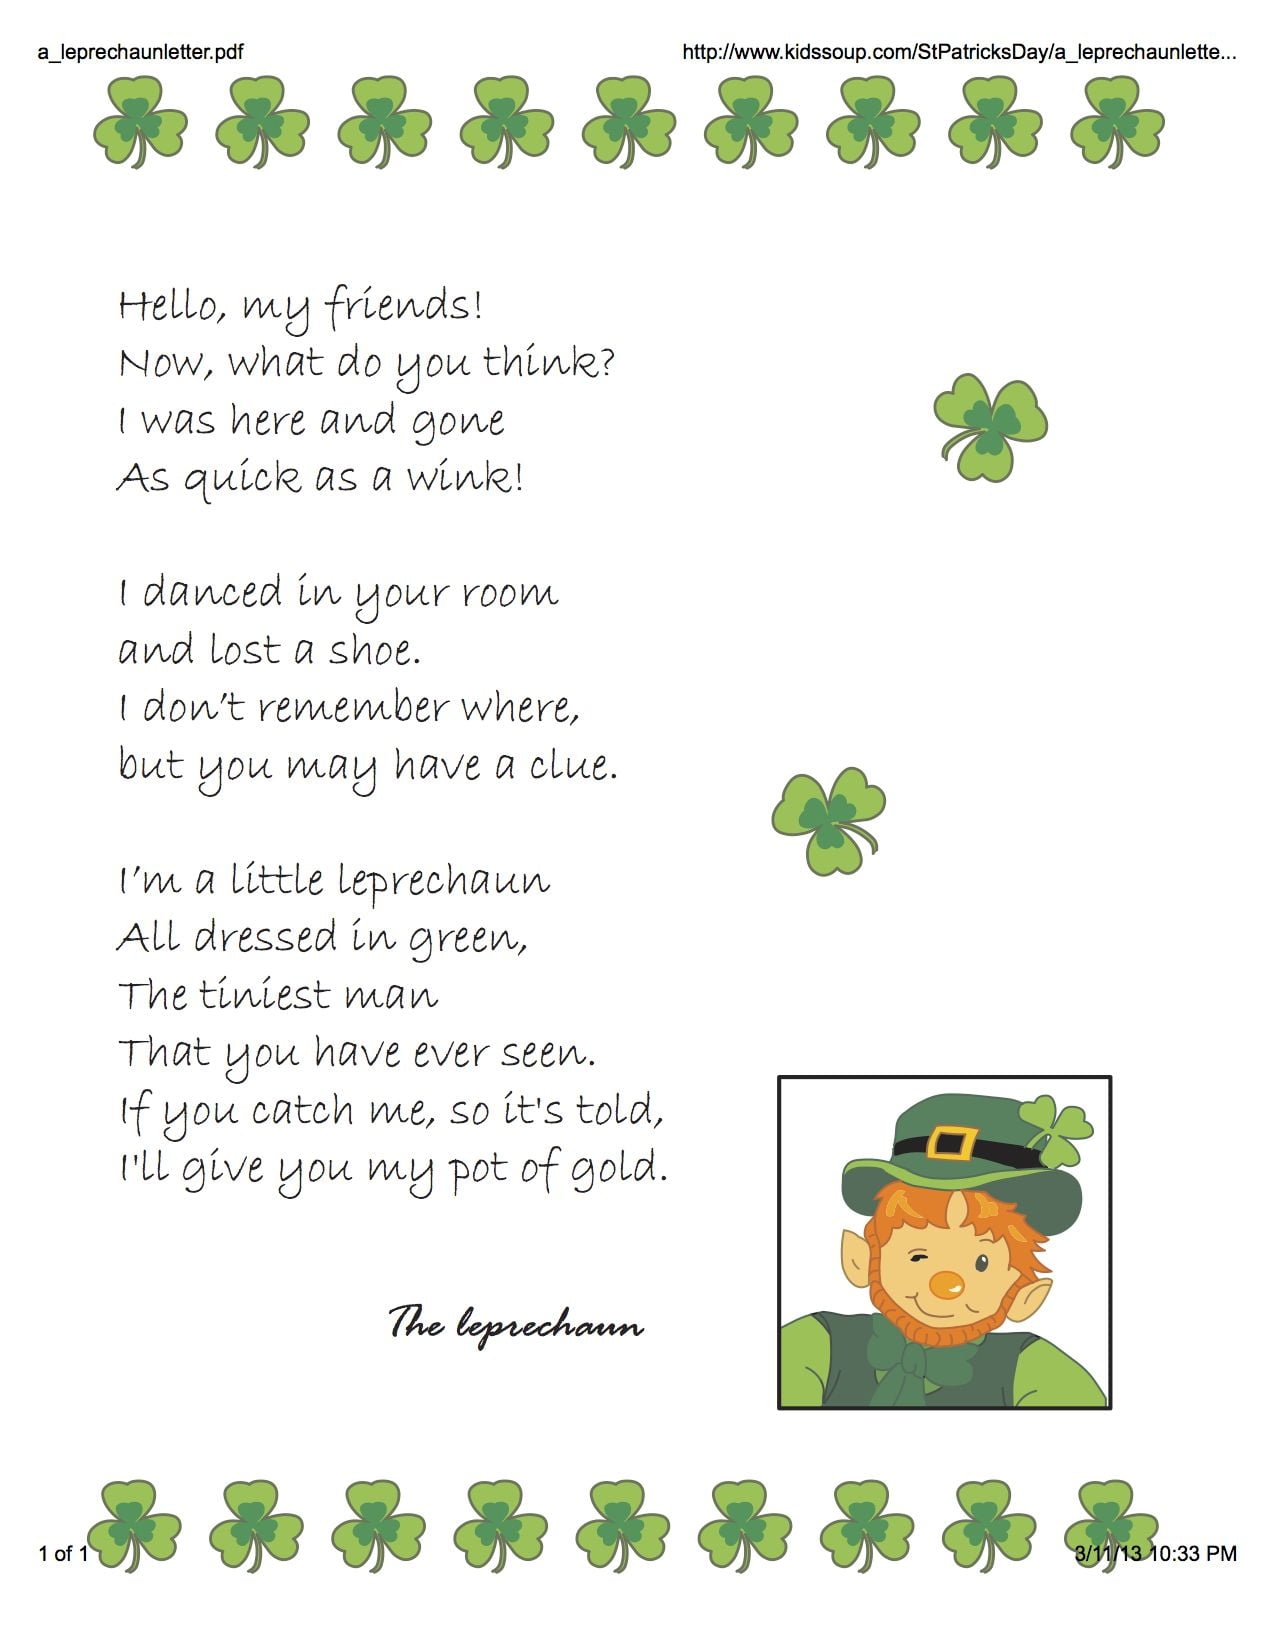 LETTER FROM THE LEPRECHAUN St Patrick Day Activities St Patrick s Day Games St Patrick s Day Crafts